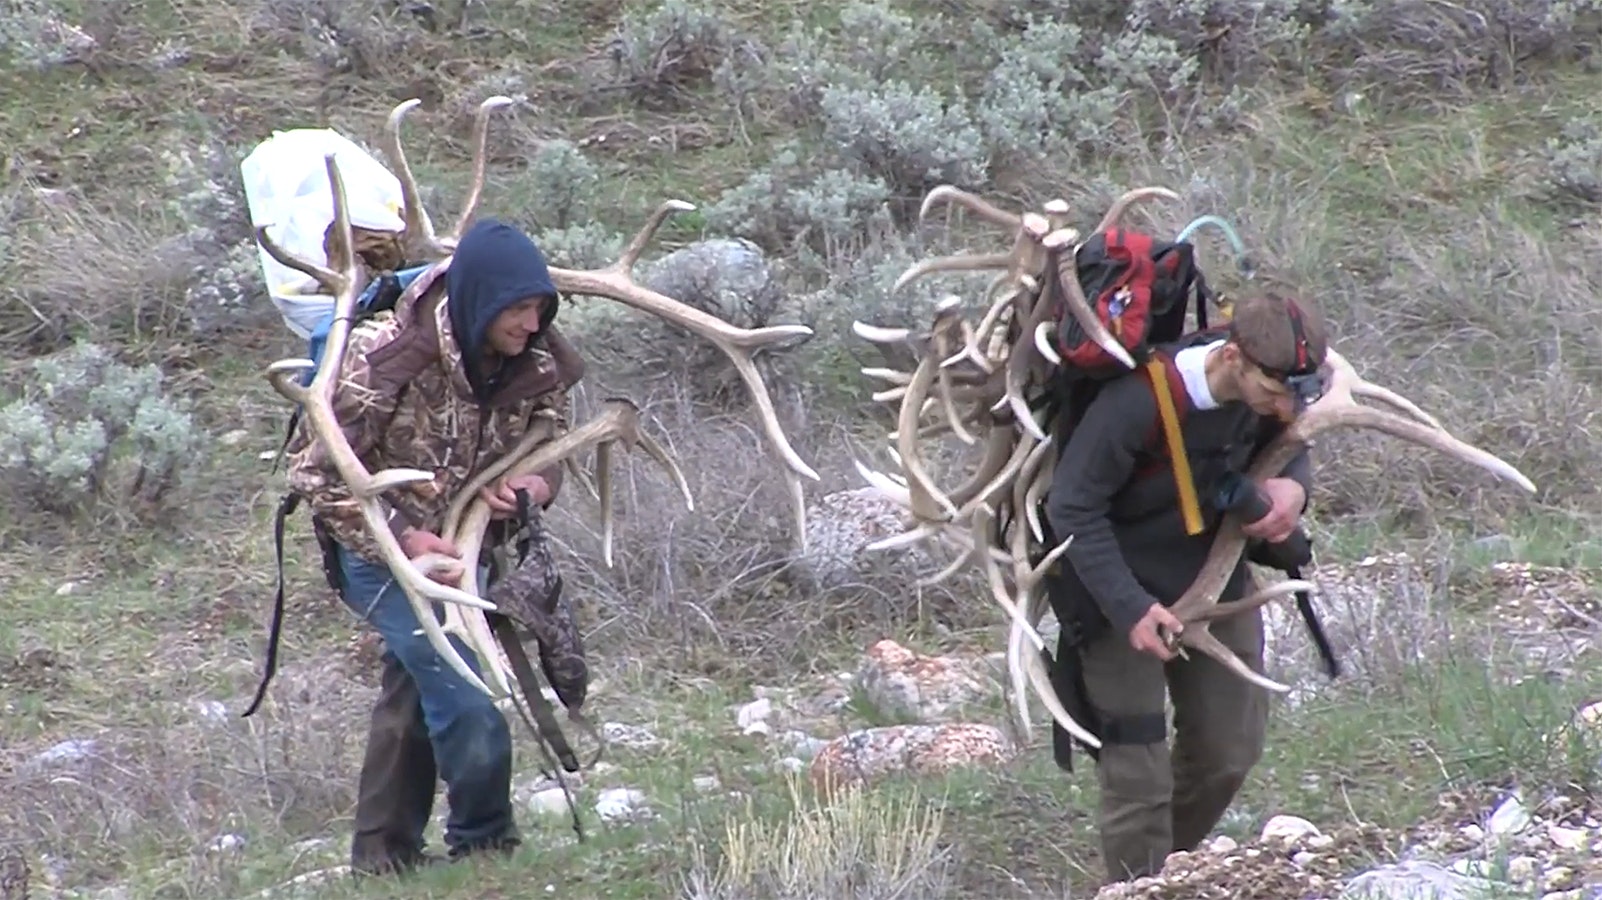 Shed antler hunting season opened Monday on the National Elk Refuge in Teton County, and opens May 15 elsewhere around Wyoming.